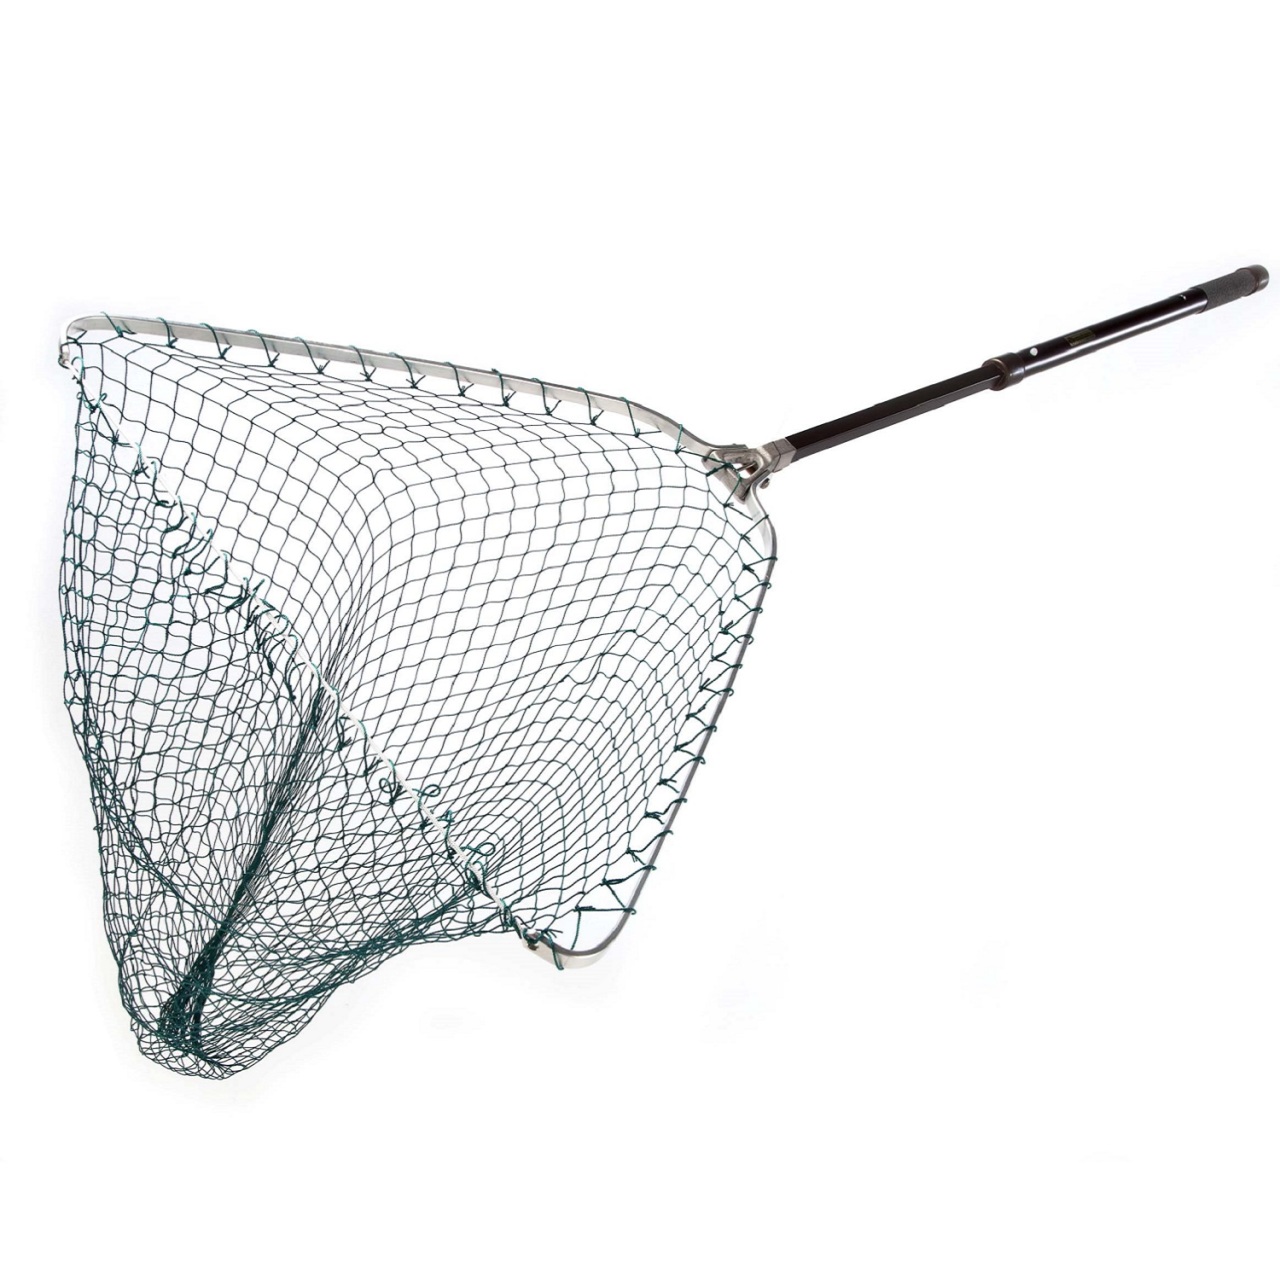 McLean Nets - Untamed Flies and Tackle